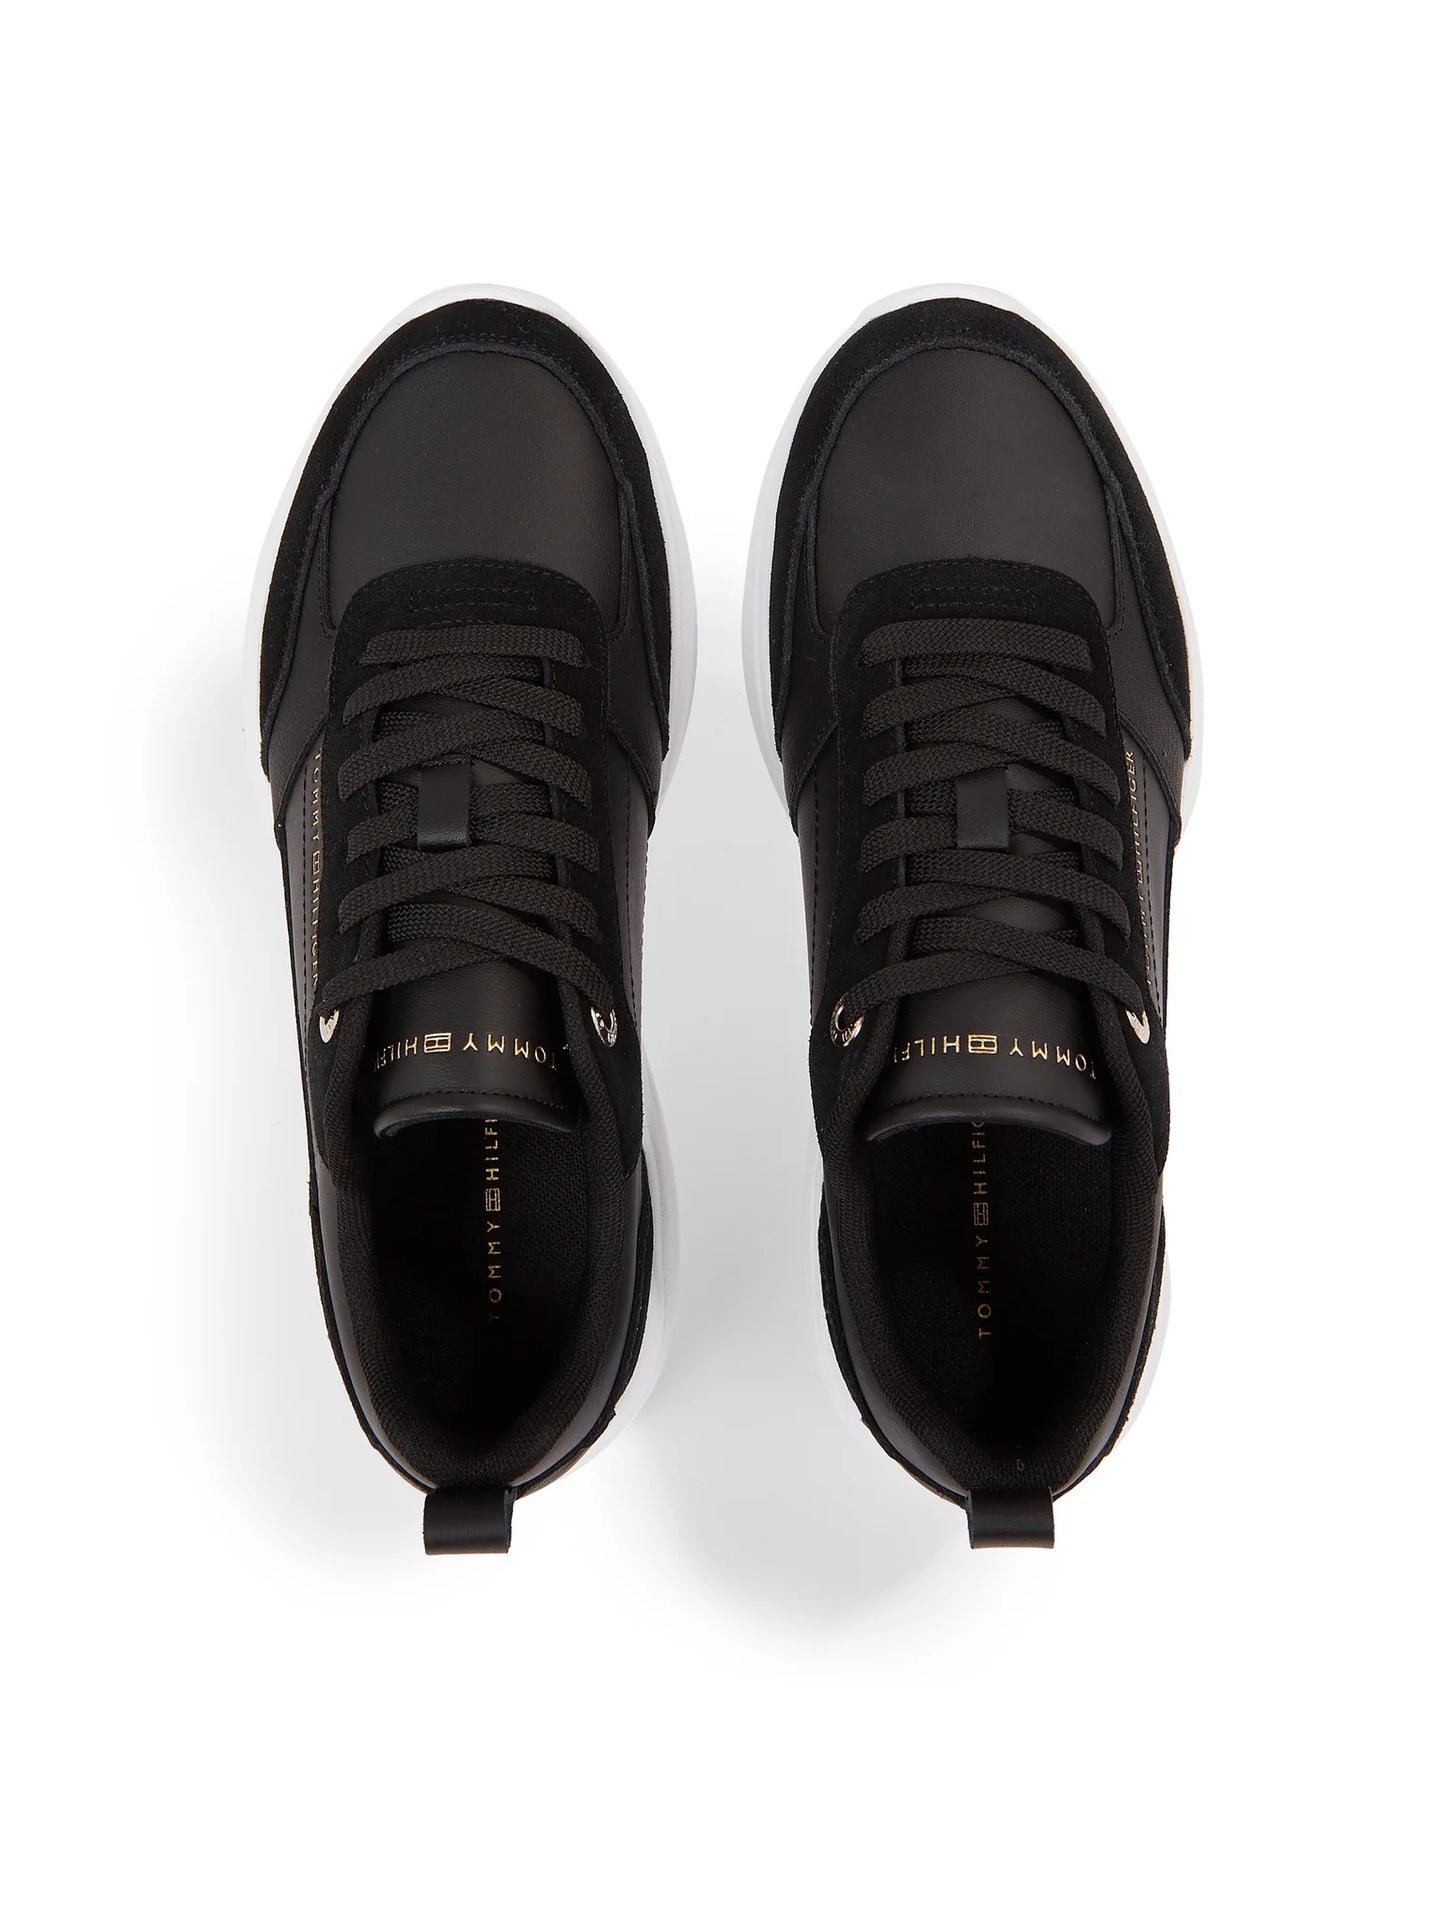 Tommy Hilfiger Black Casual Shoes for Women